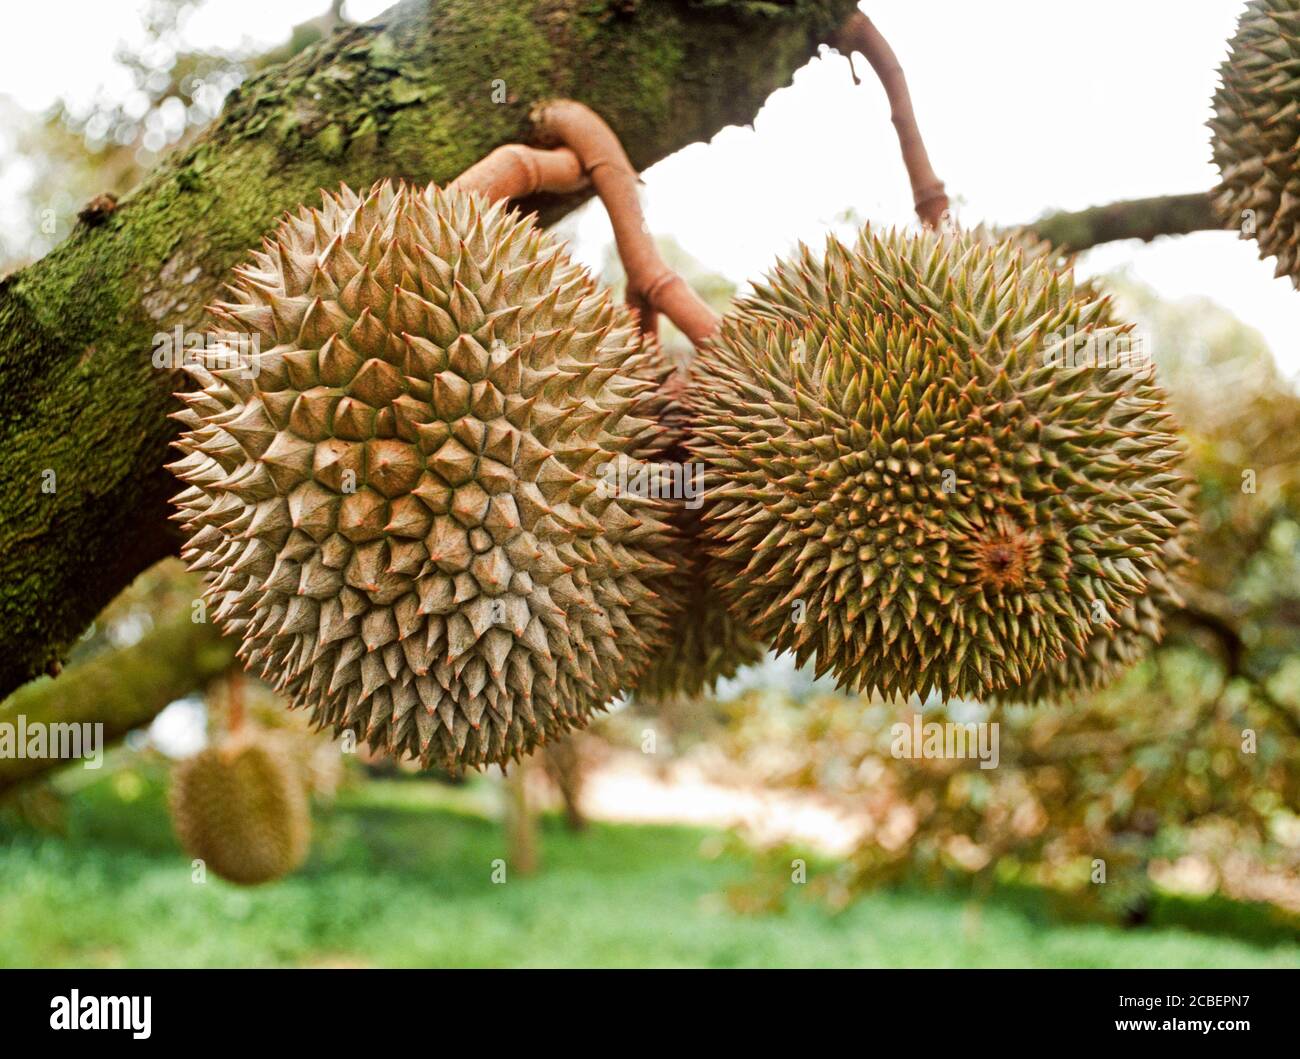 Durian fruit hanging from a tree, a hybridised dwarf variety allowing easier harvesting. Stock Photo